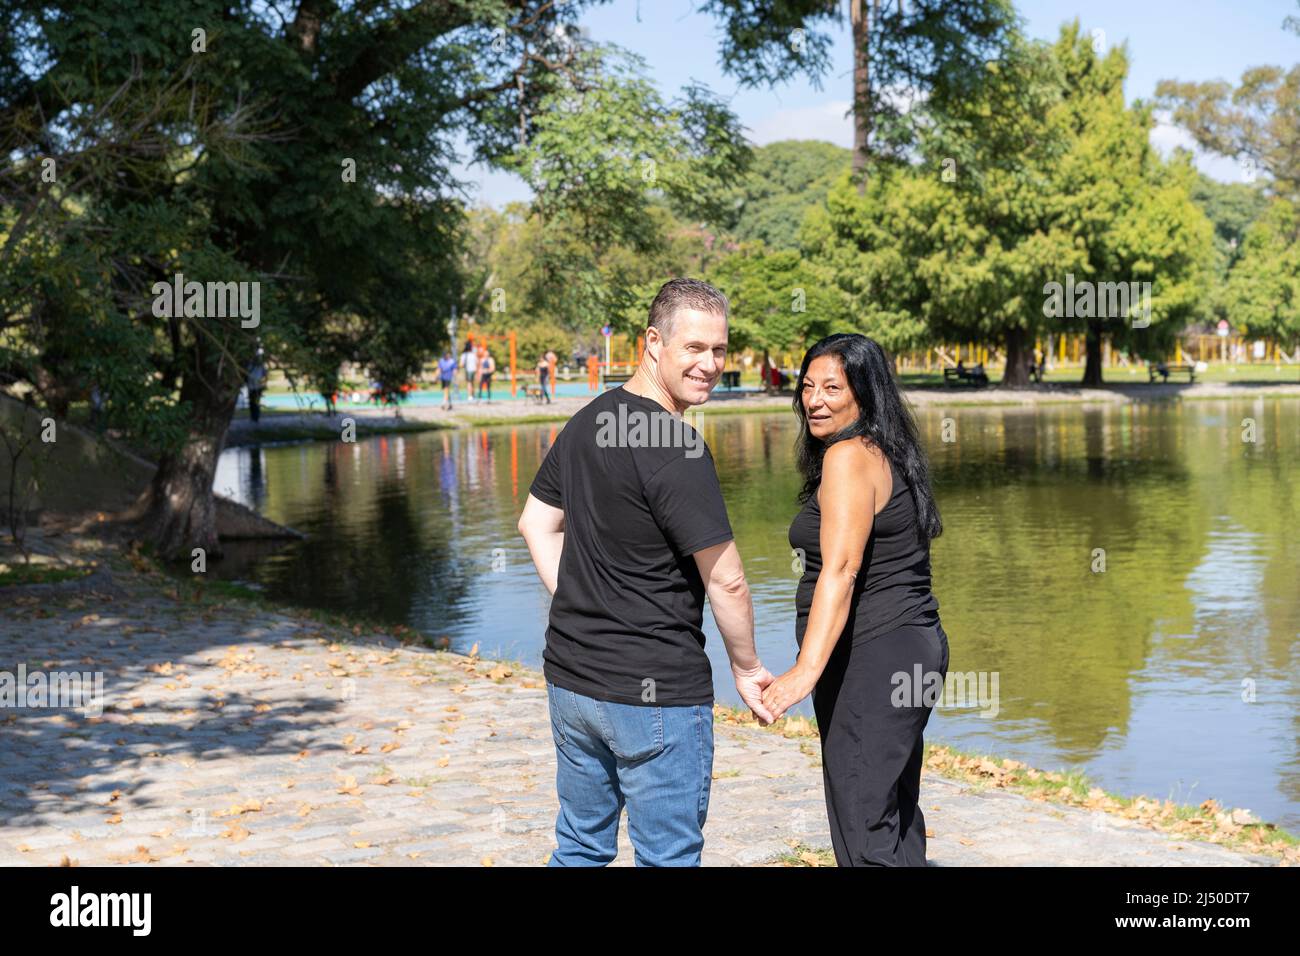 Multi-ethnic couple formed by an Andean woman and a Caucasian man walking by a lake. Happy expressions and faces of lovers Stock Photo